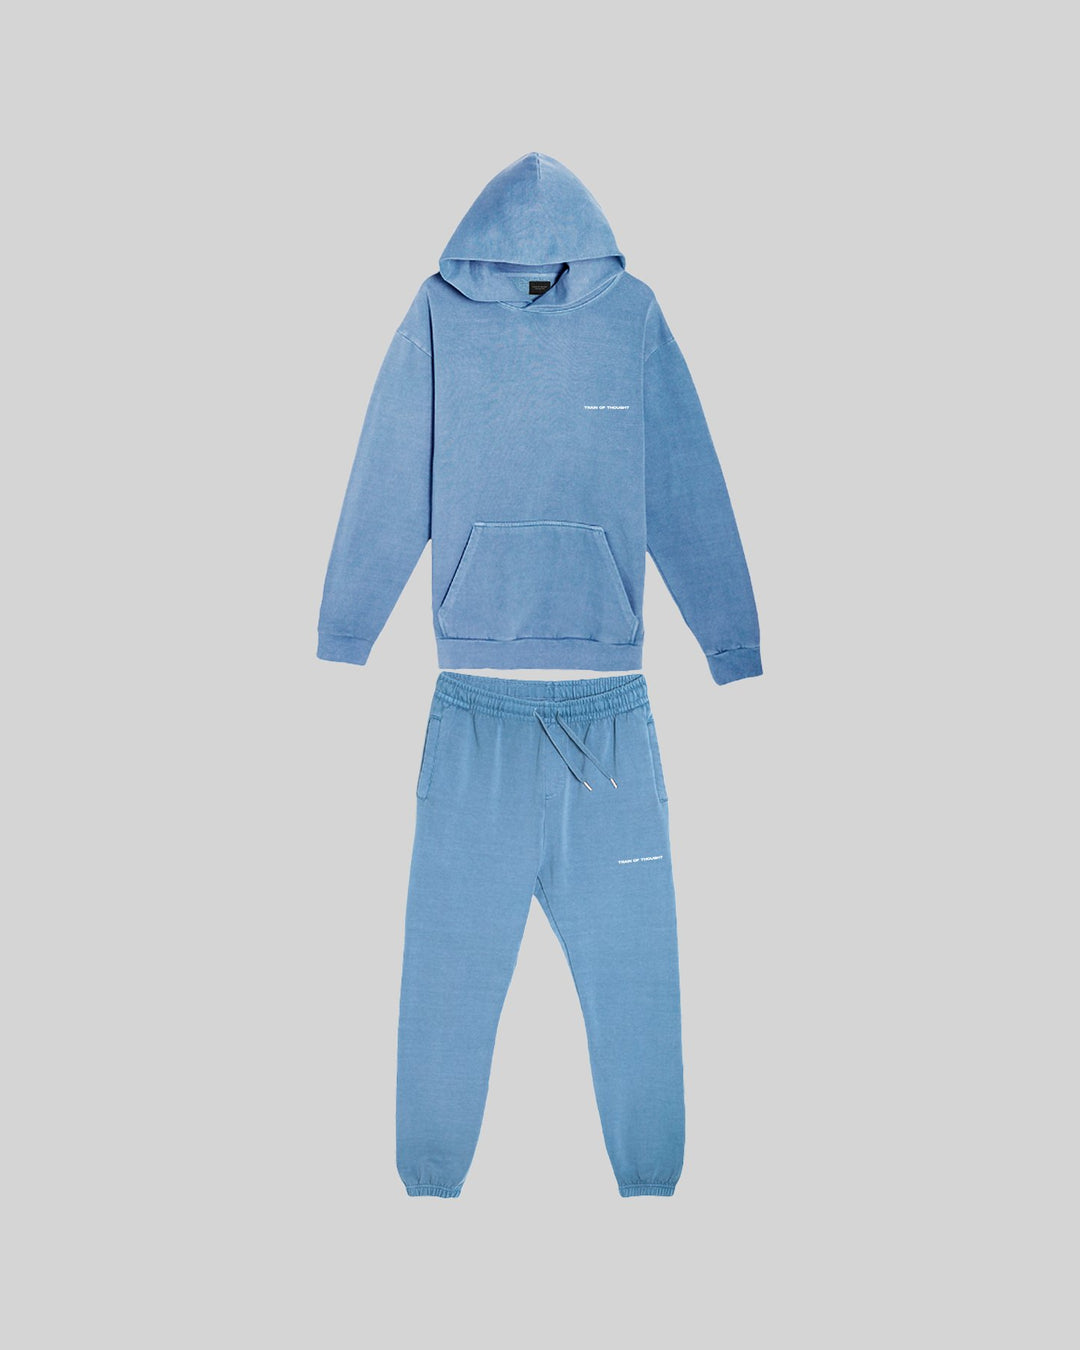 Necessary Lounge Pebble Blue Set - trainofthoughtcollective